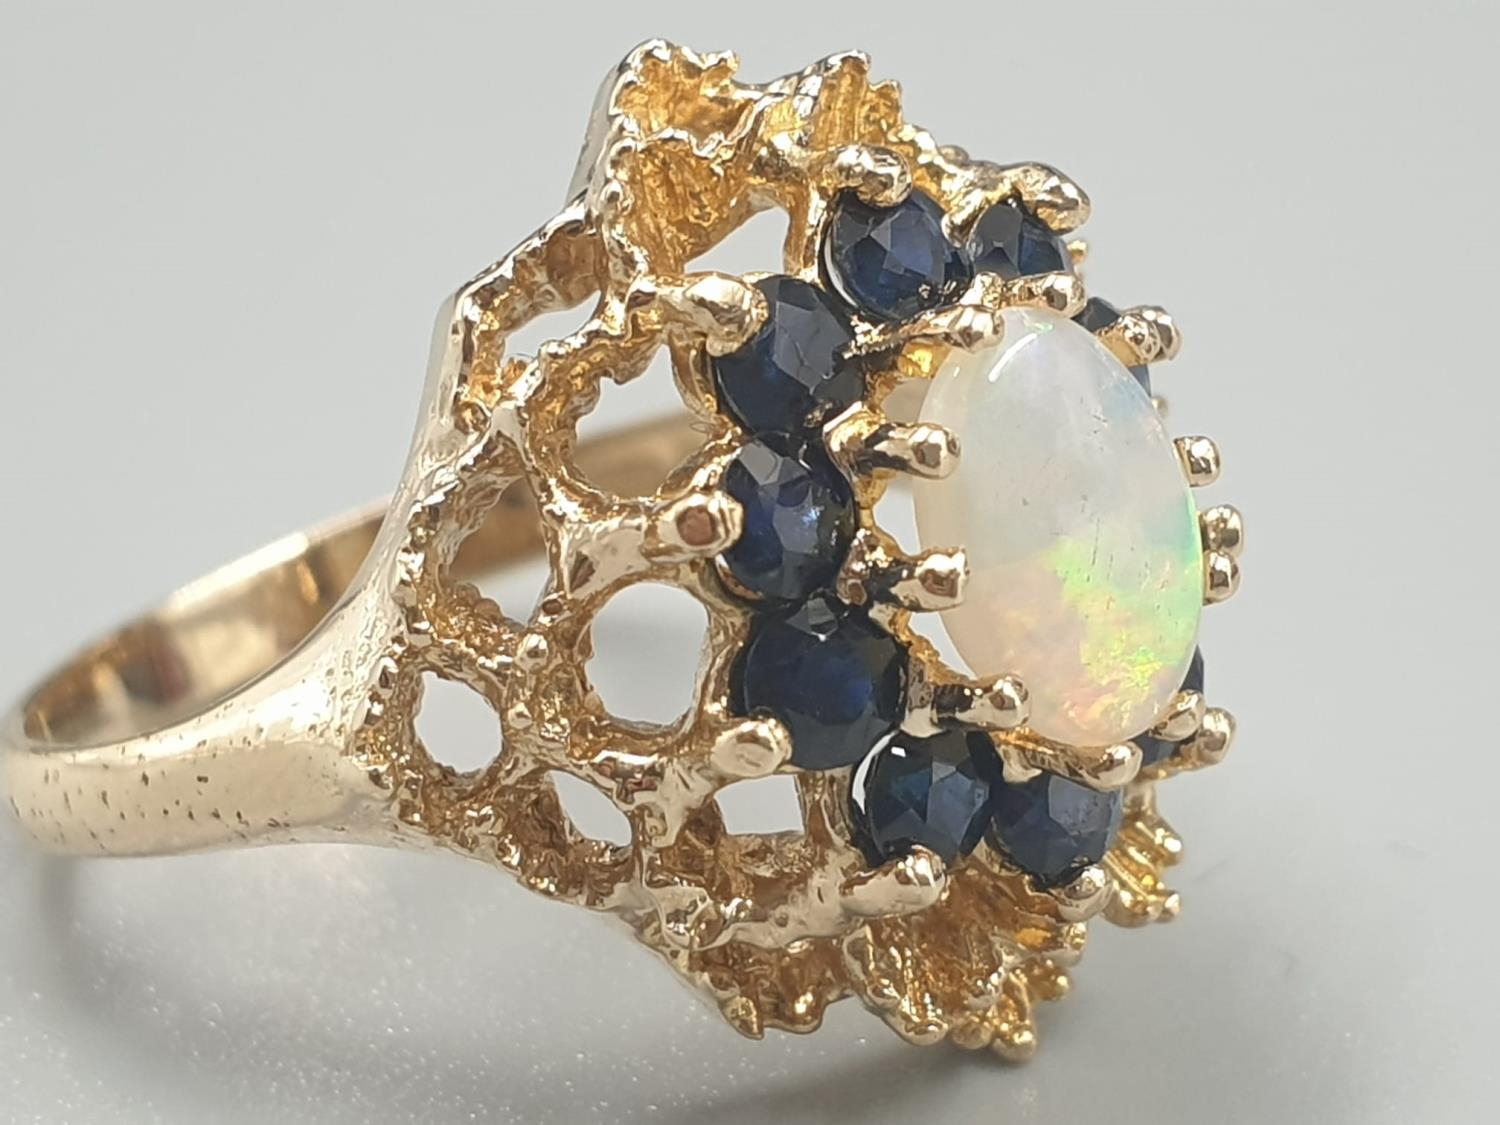 9K YELLOW GOLD OPAL & SAPPHIRE CLUSTER RING WEIGHT 5.2G SIZE O - Image 2 of 7